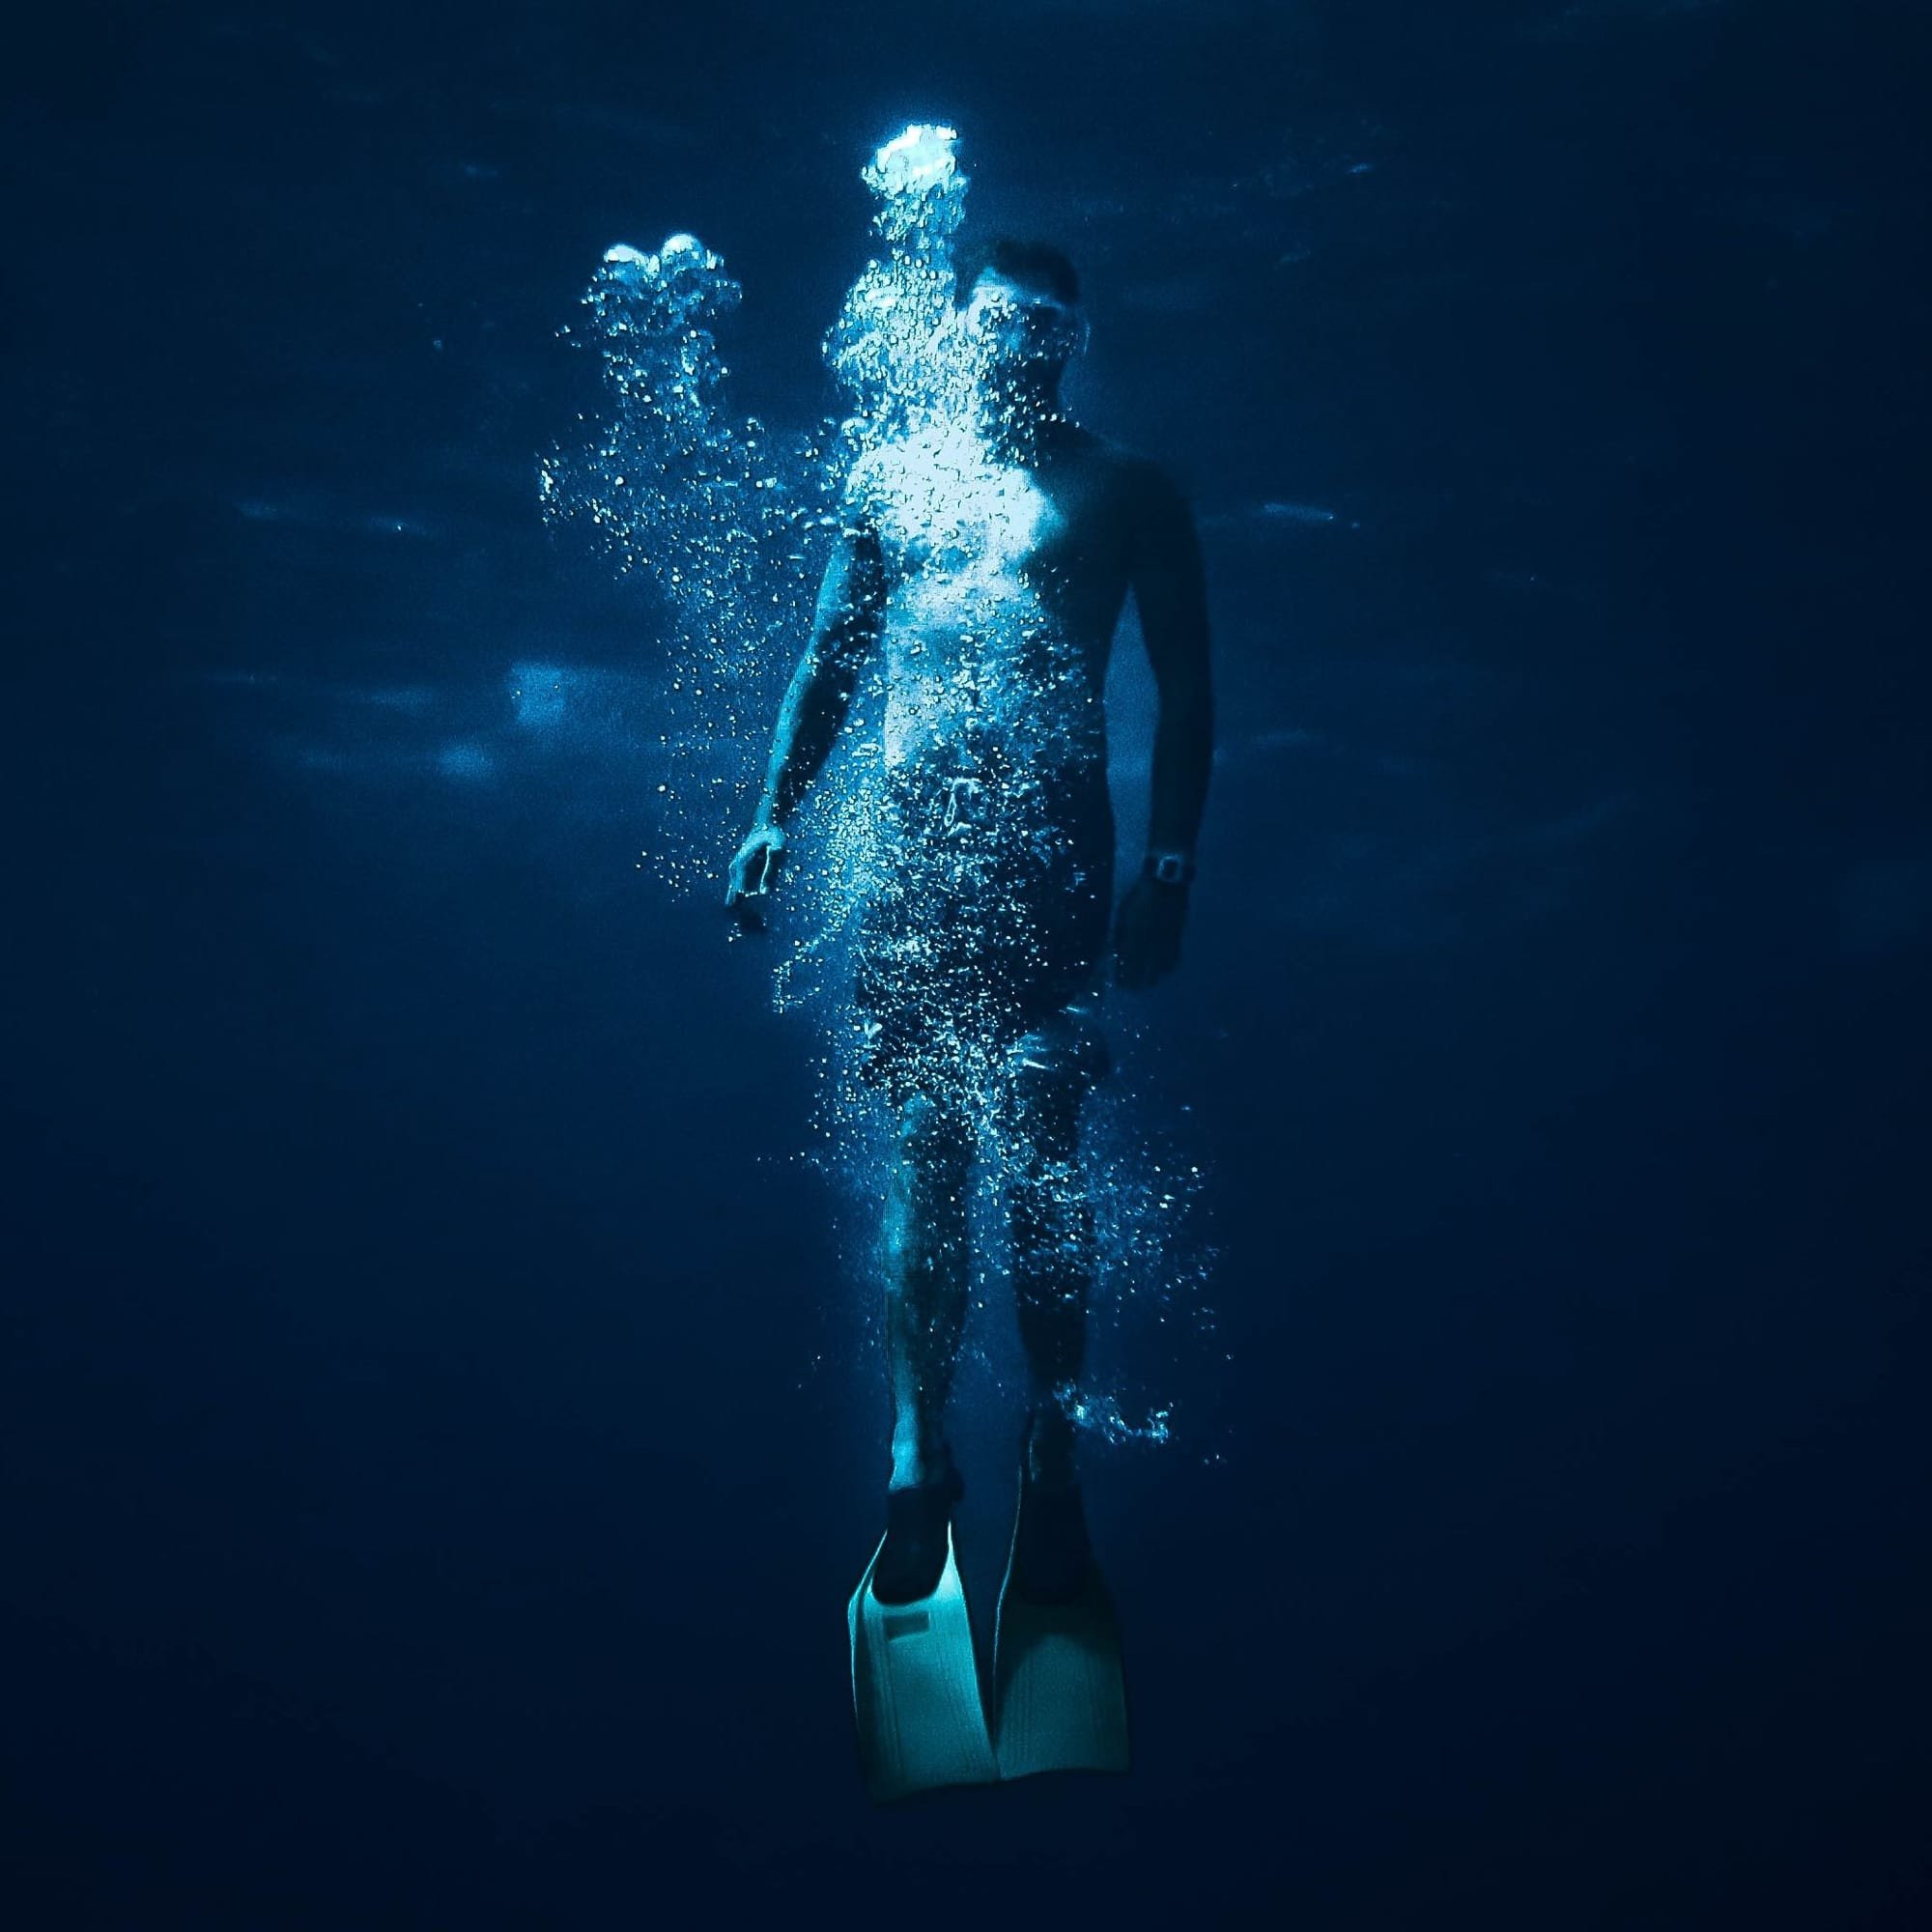 Breathing is "overrated" for those immersed in Deep Diving